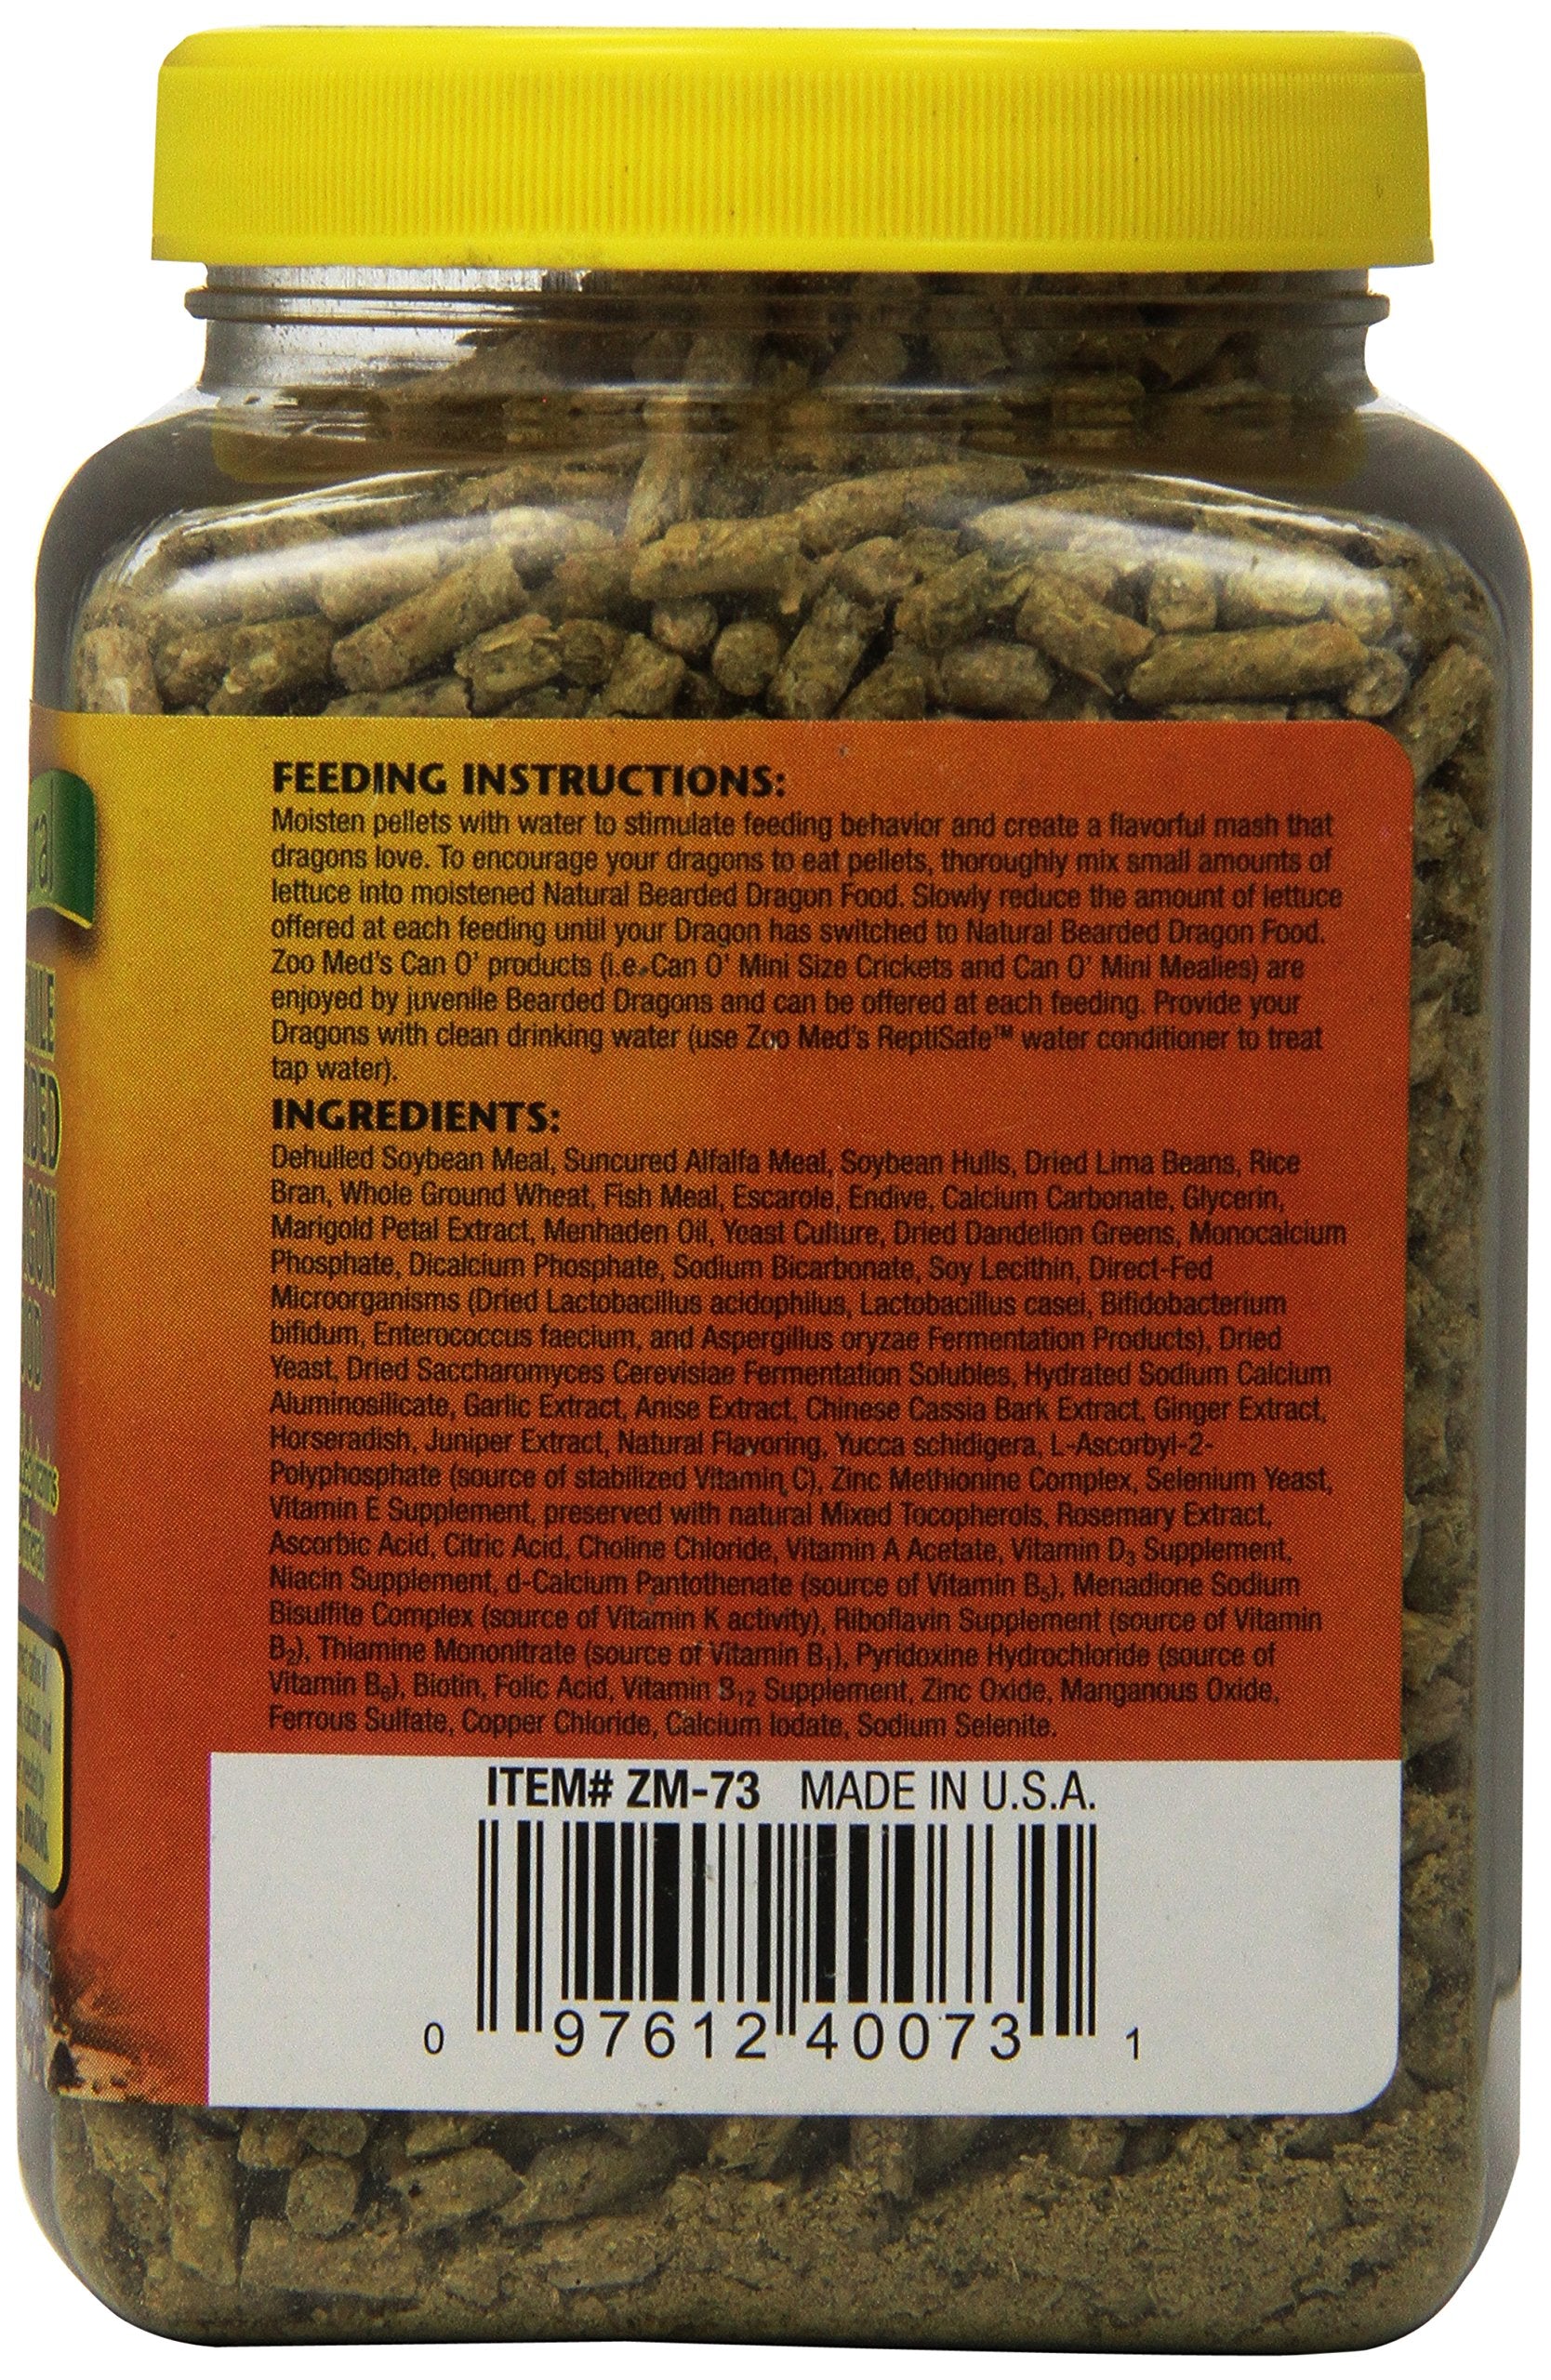 Zoo Med Laboratories Bearded Dragon Pellets Juvenile Freeze-Dried Reptile Food - 10 Oz  